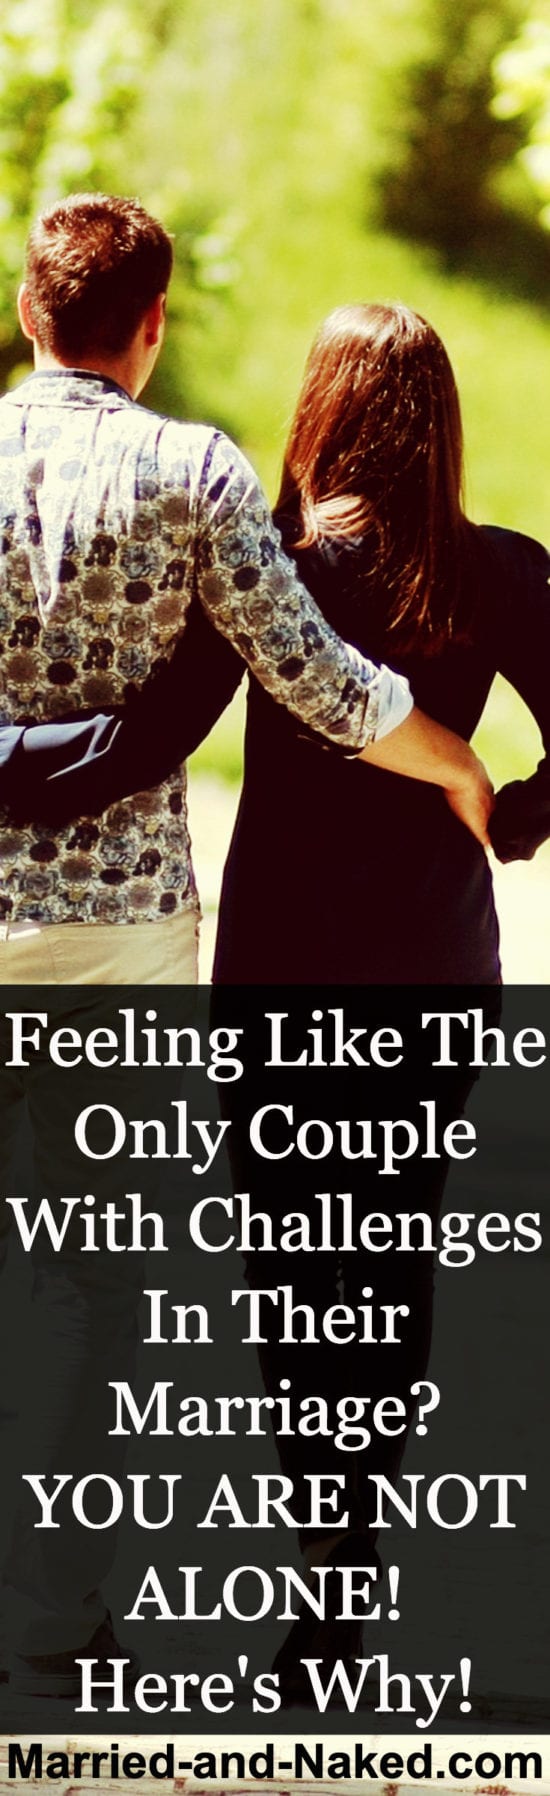 Feeling like the only couple with challenges in their marriage? You are not alone!